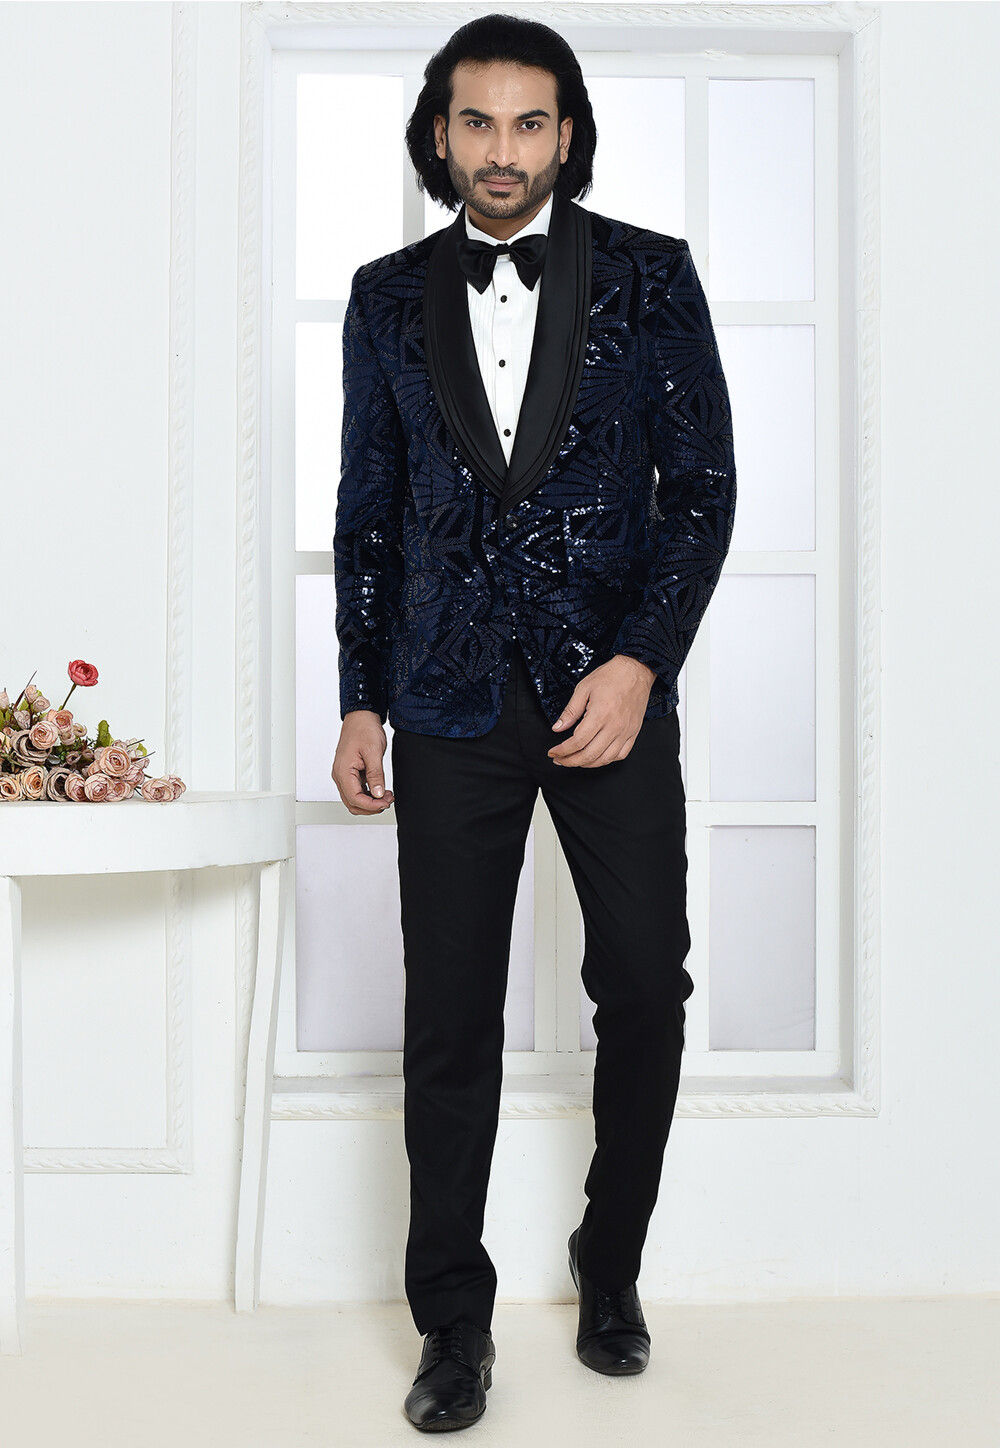 Buy Blue Velvet Suit for Groom and Groomsmen, 3 Piece Suit With Black  Lapel, Formal Suit for Prom, Wedding, Party Wear Outfit. Online in India -  Etsy